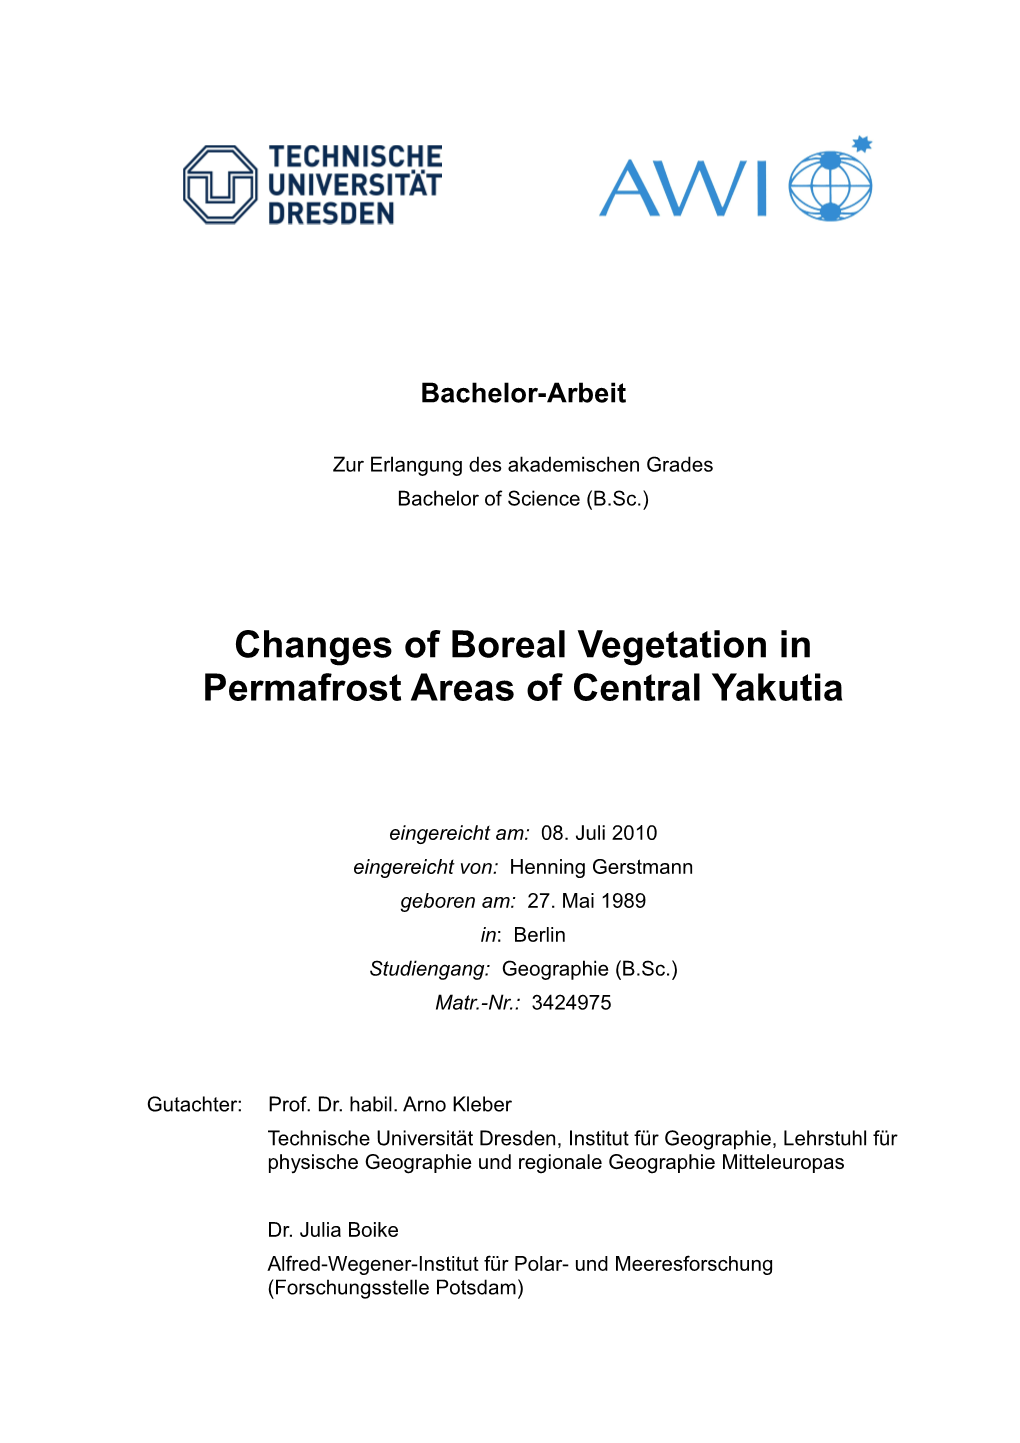 Changes of Boreal Vegetation in Permafrost Areas of Central Yakutia